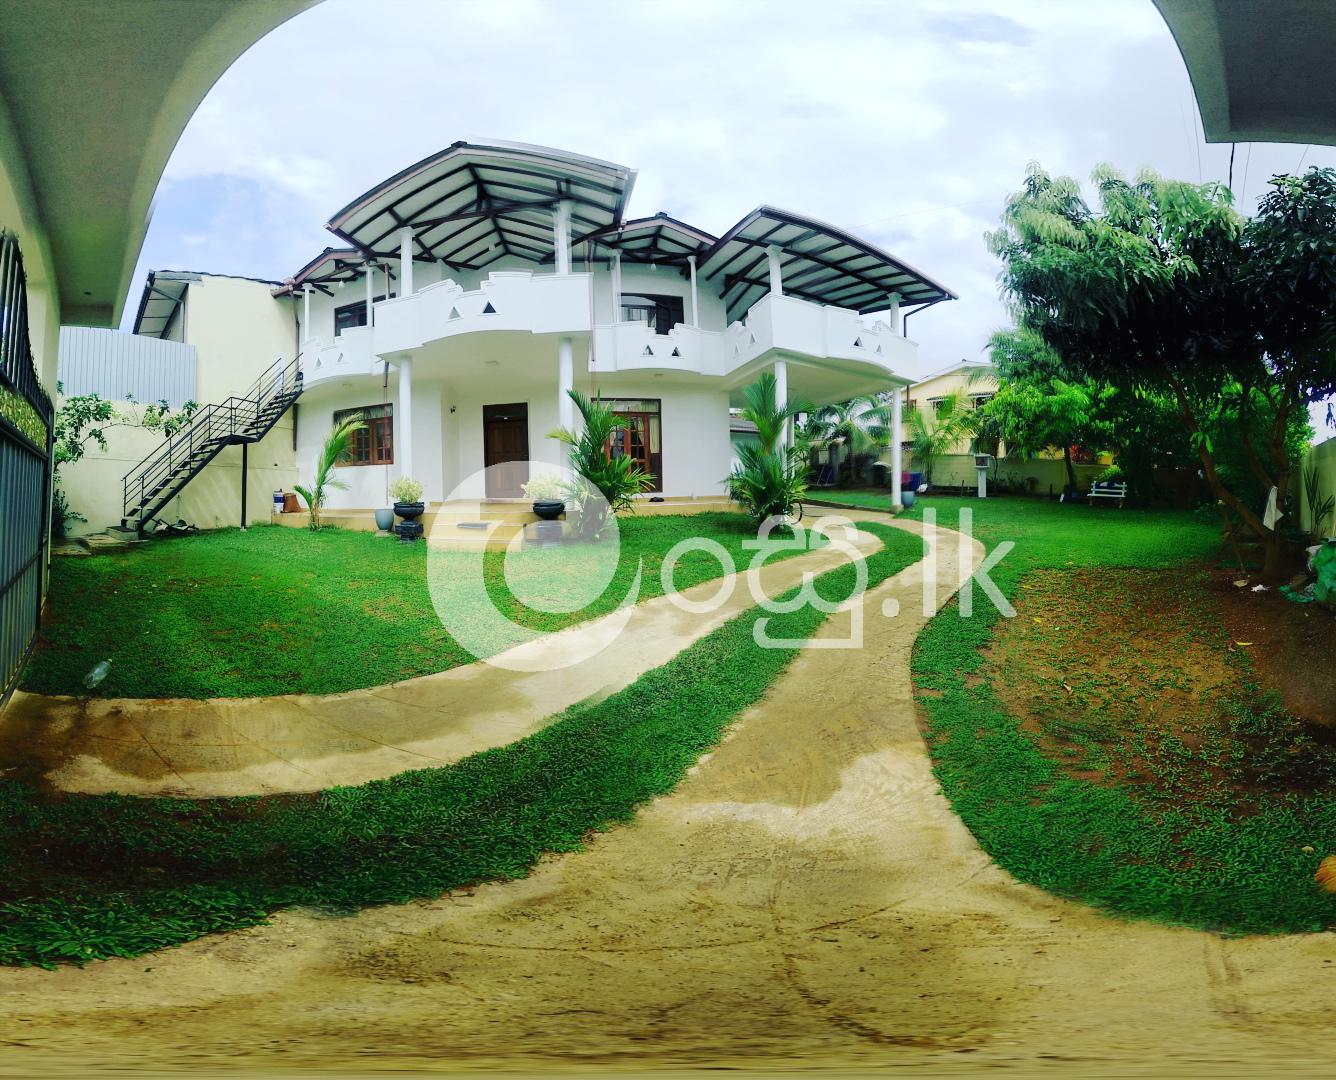 House for sale  Houses in Kotte